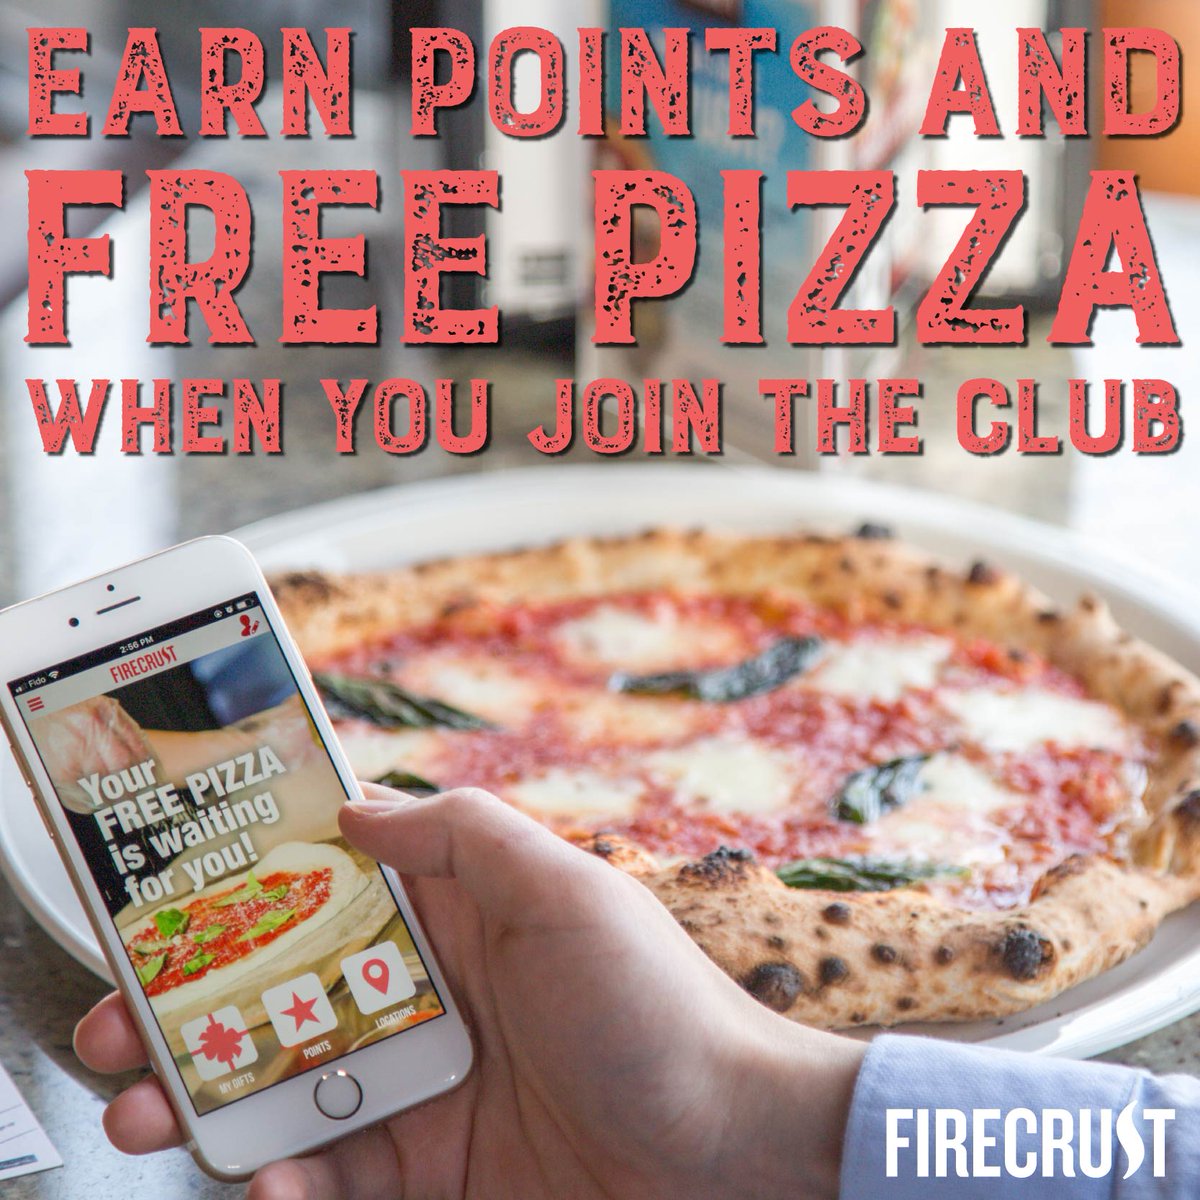 Time to get your free pizza! Don't forget to join our rewards program! Link is in the bio! 🤩 . . . . #firecrust #custompizza #customsalad #custompasta #premiumtoppings #neapolitanpizza #ilovepizza #bestpizza #instagood #pizzalove #yummy #foodie #amazing #wherevancouver